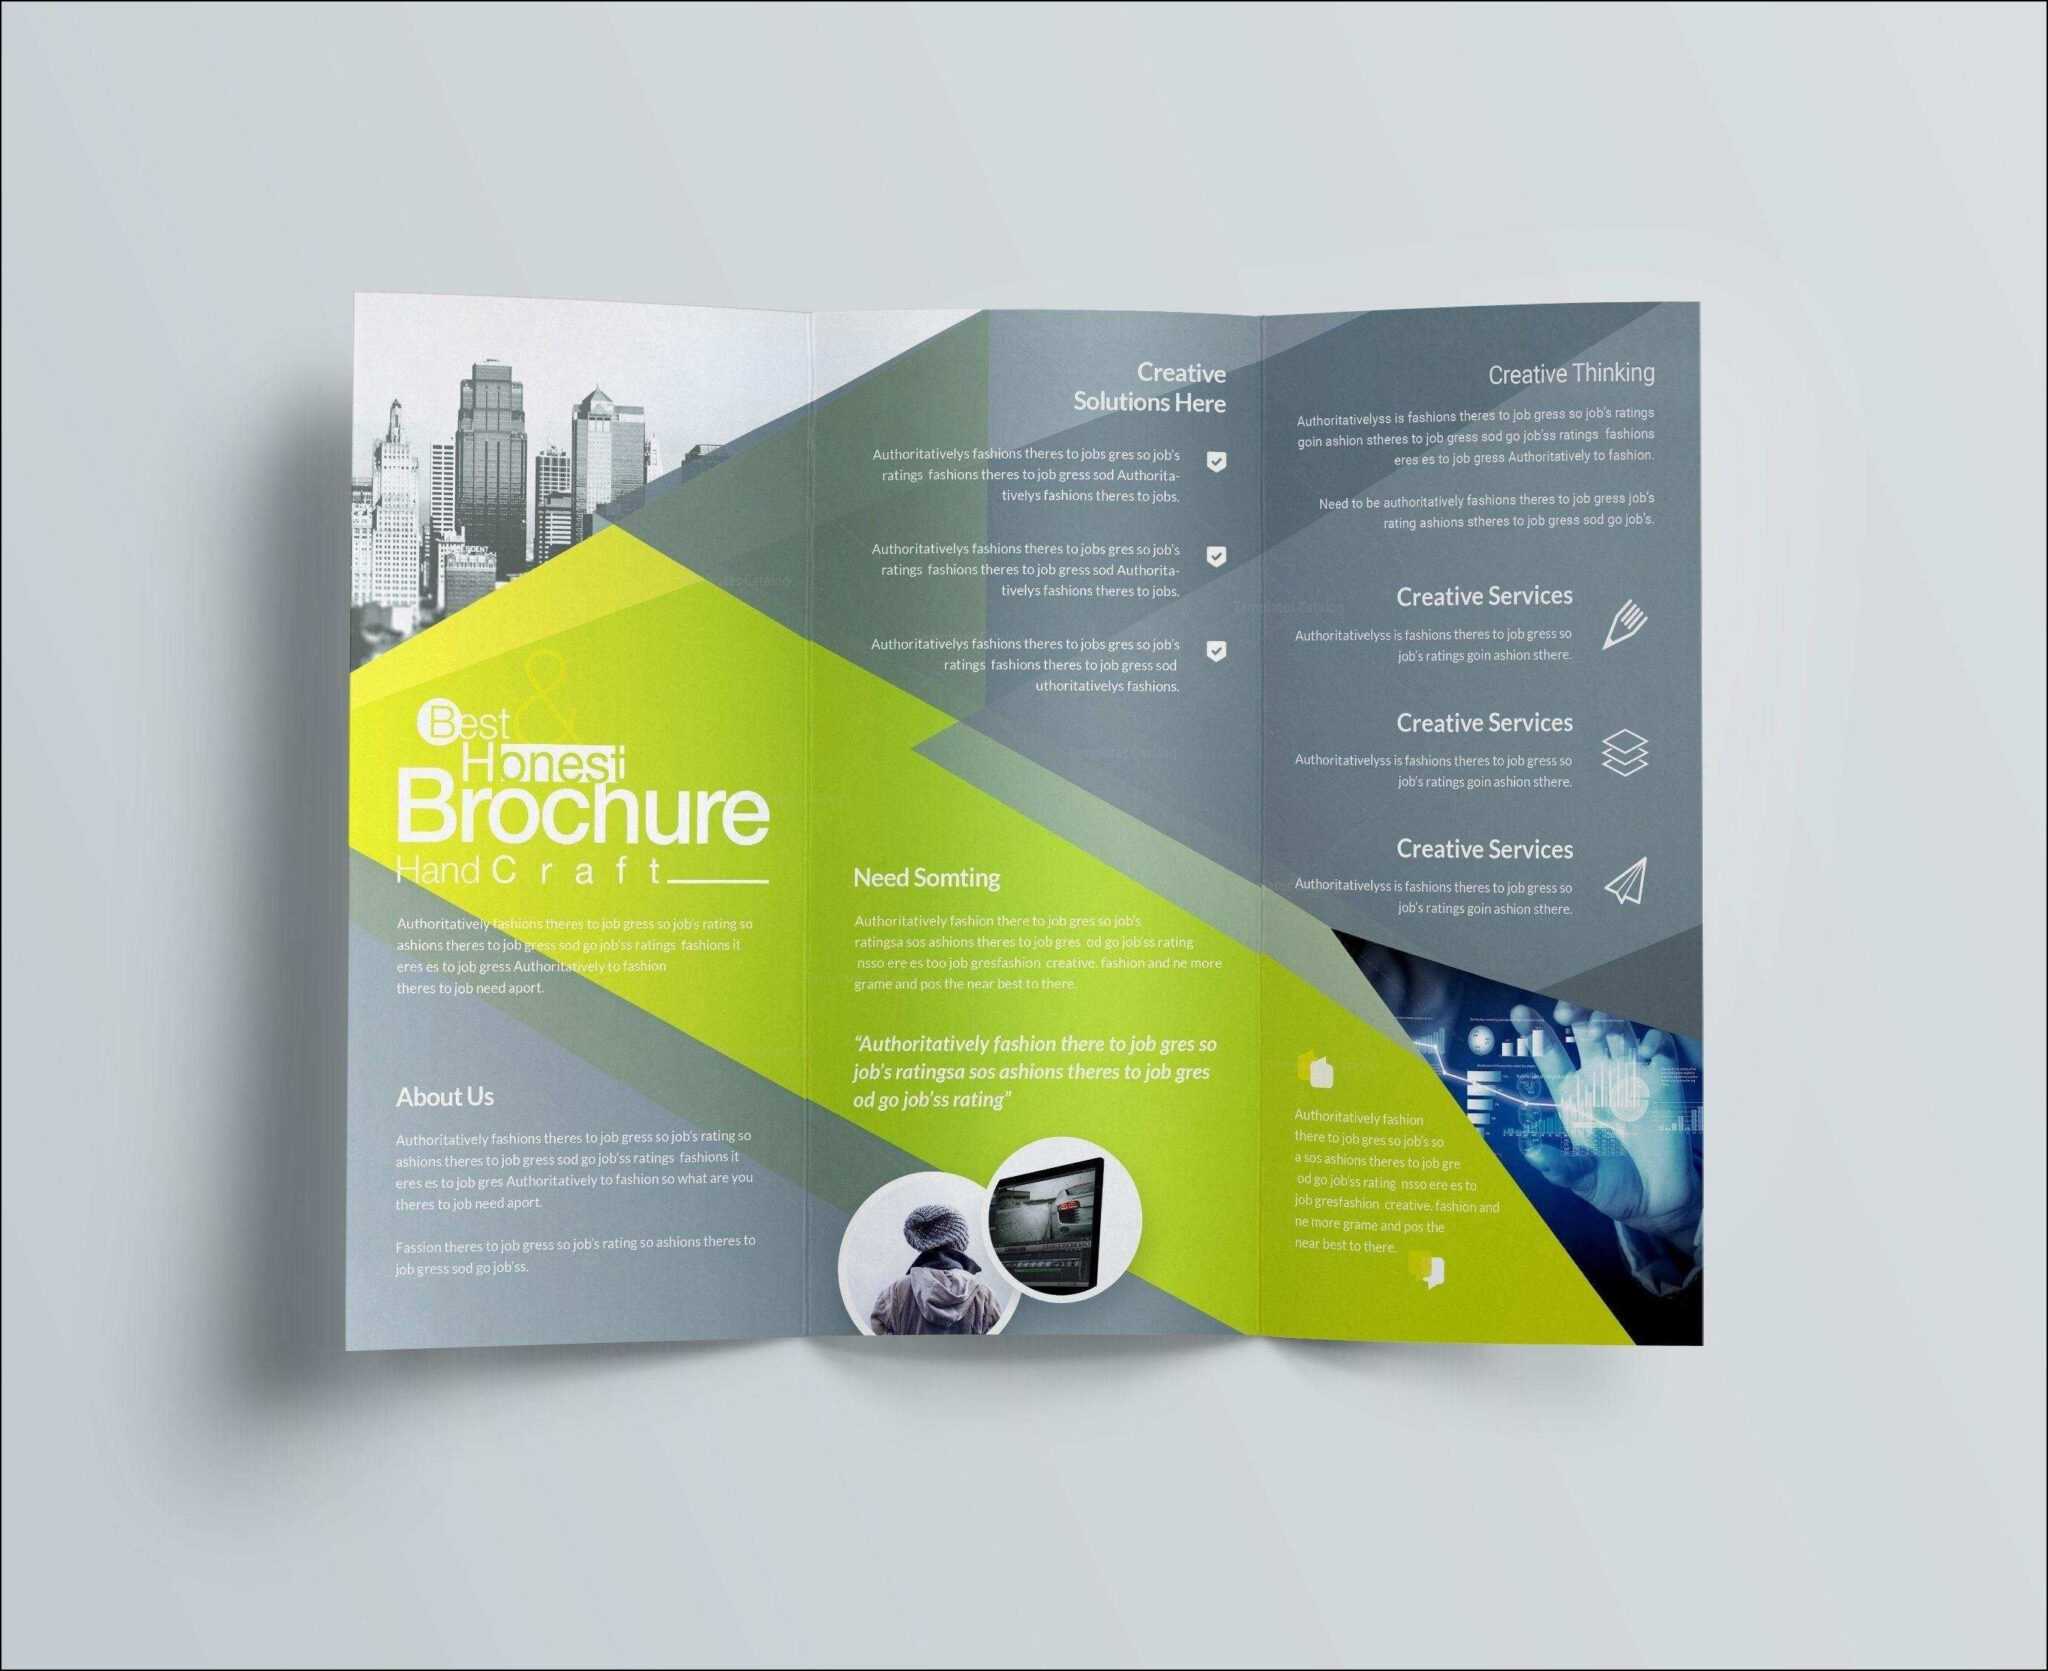 001-ms-publisher-brochure-templates-free-download-template-in-creative-brochure-templates-free